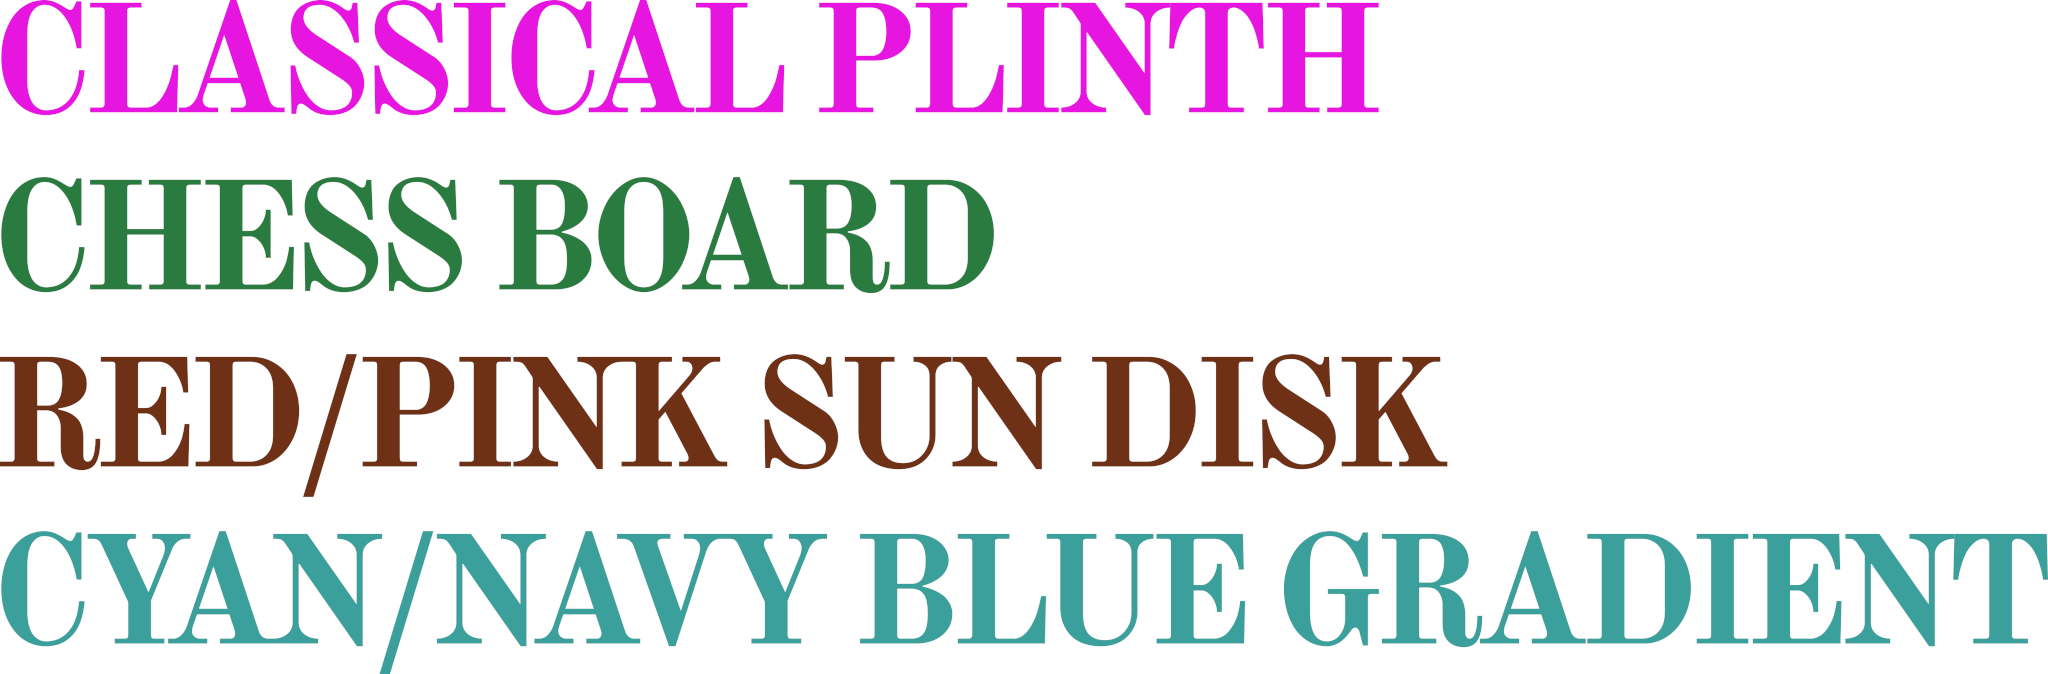 Rows of Colourful text: CLASSICAL PLINTH, CHESS BOARD, RED/PINK SUN DISK, CYAN/NAVY BLUE GRADIENT